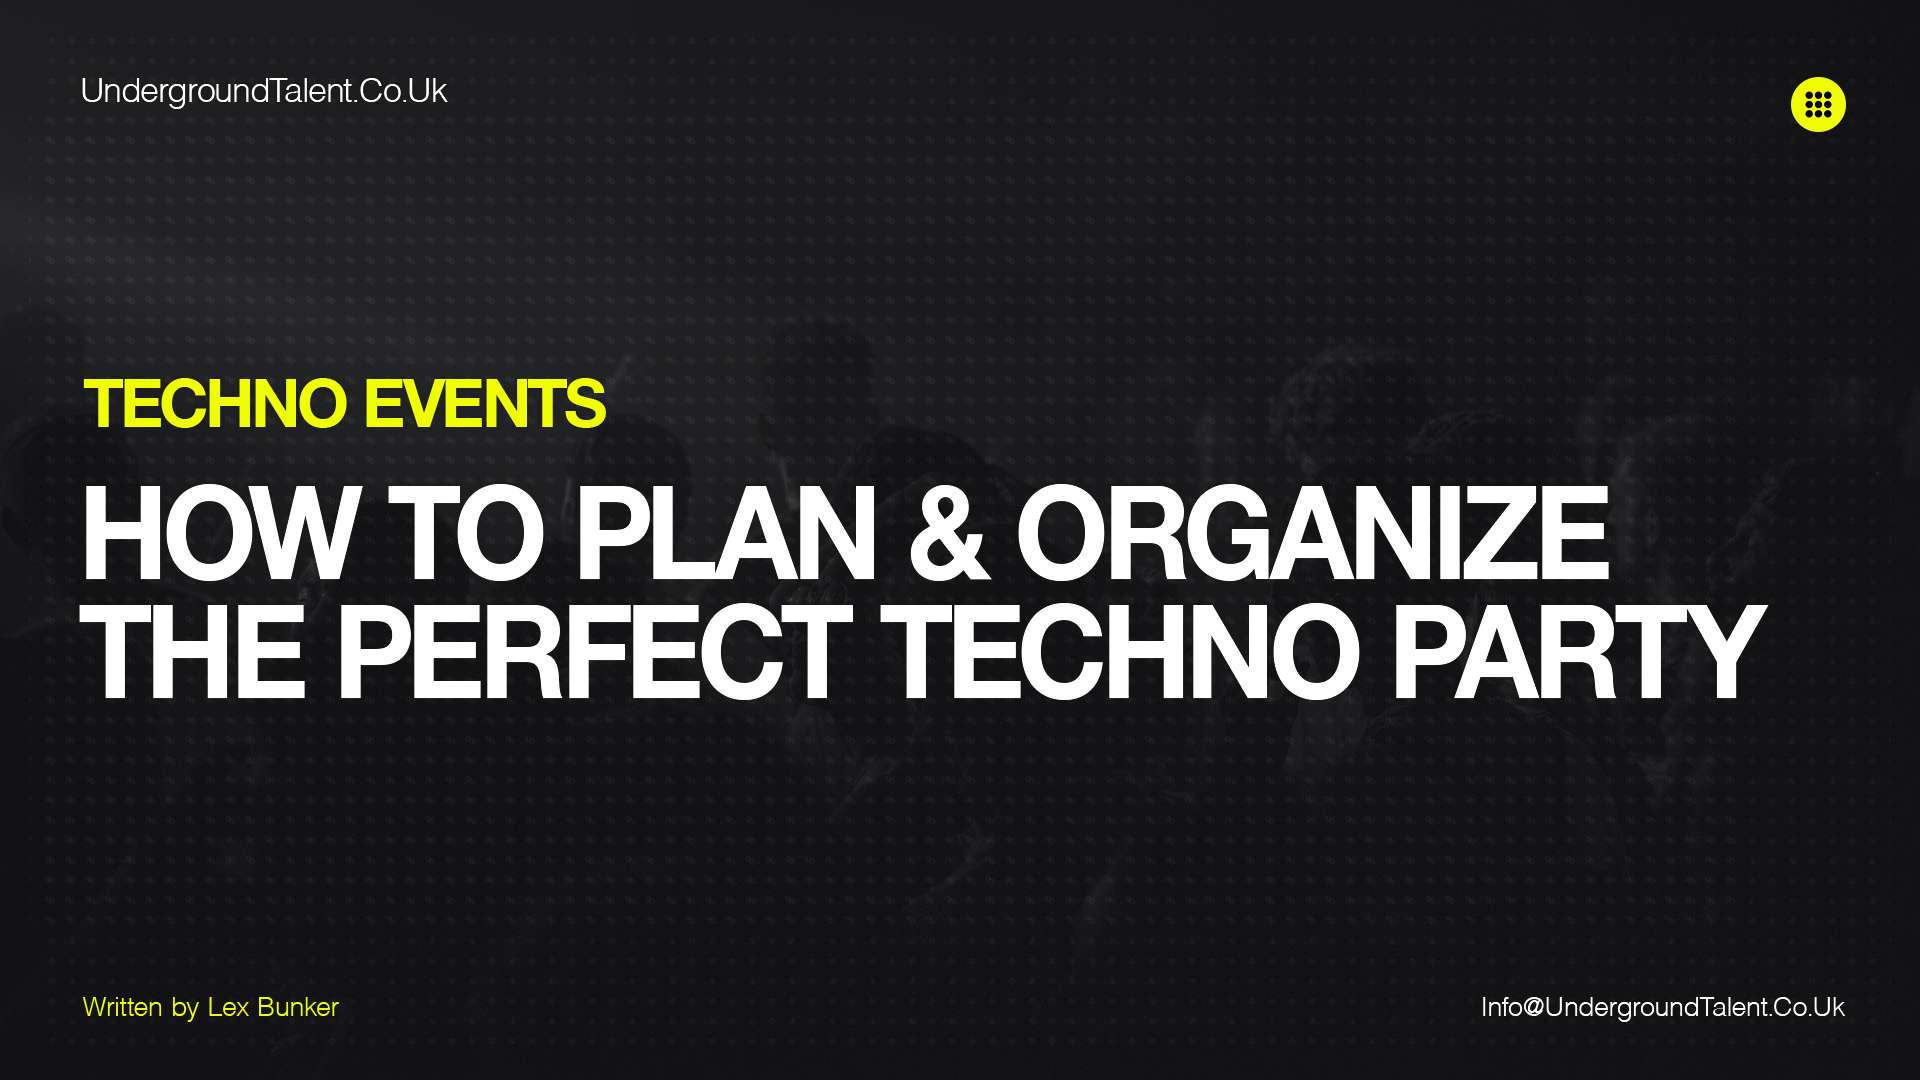 Techno Events: How to Plan & Organize the Perfect Techno Party